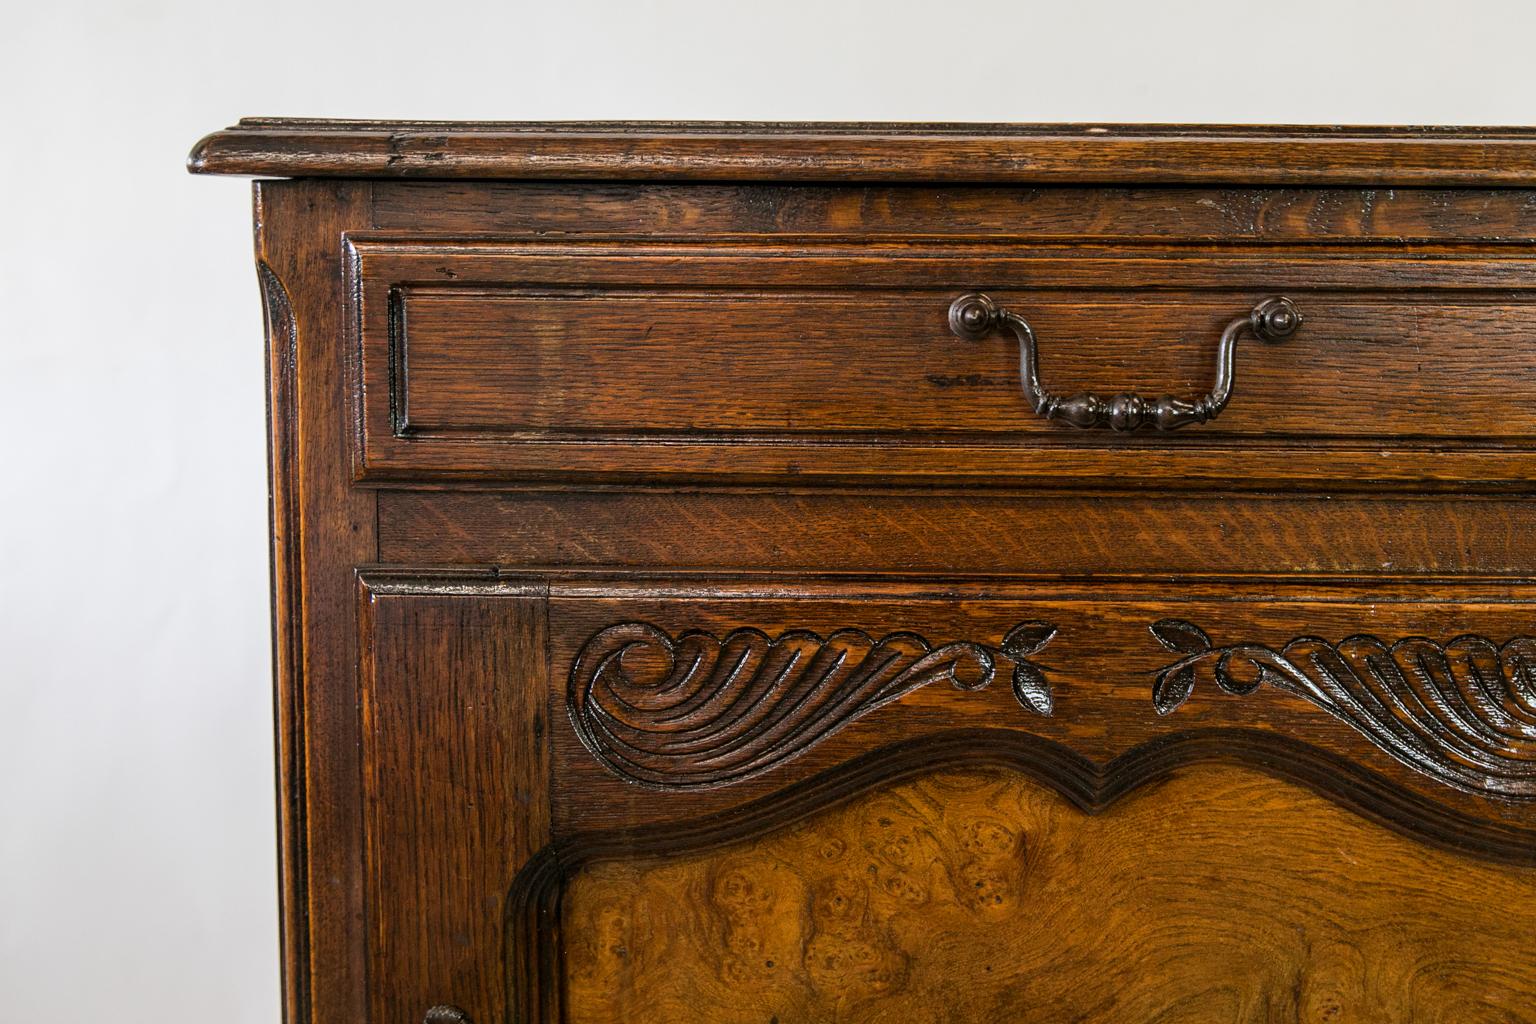 The top of this small French oak buffet has heavy bullnose molding. The top of the door has a shaped carved design. The molded door frame surrounds a recessed burl wood panel. The door has the original working lock and key. The corners have convex,